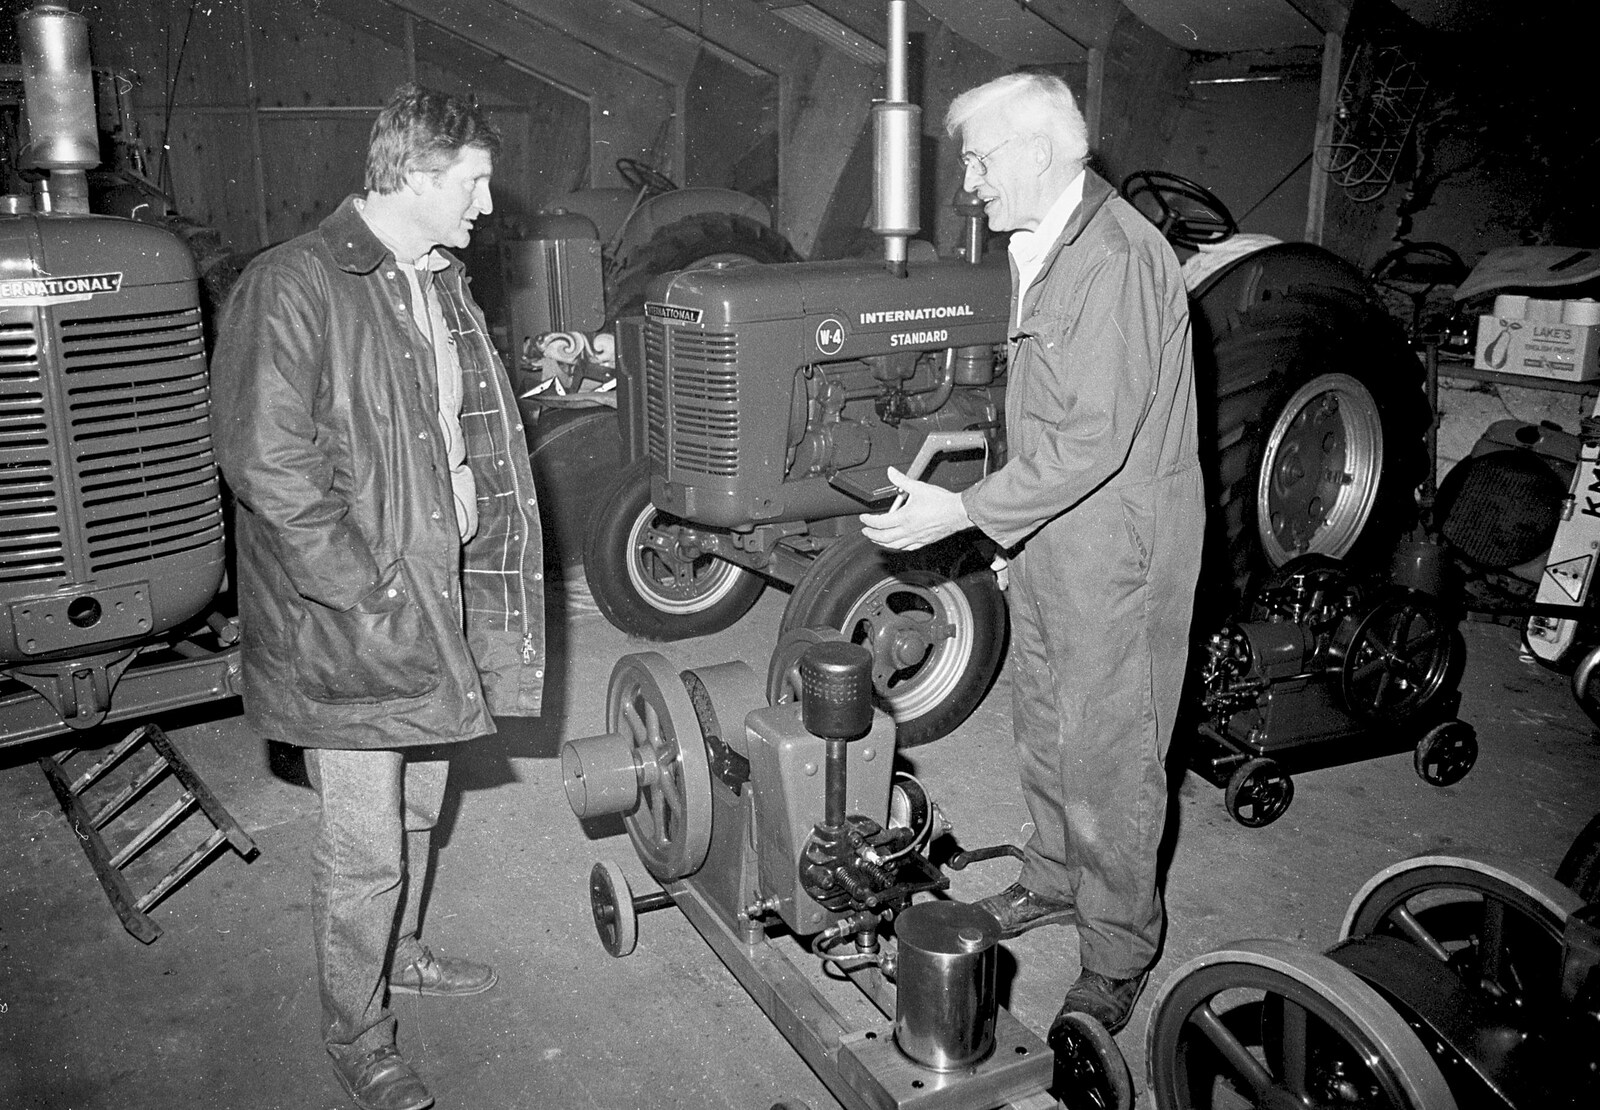 A Black and White Life in Concrete, Stuston, Suffolk - 3rd September 1992: Geoff and his chum talk about machines